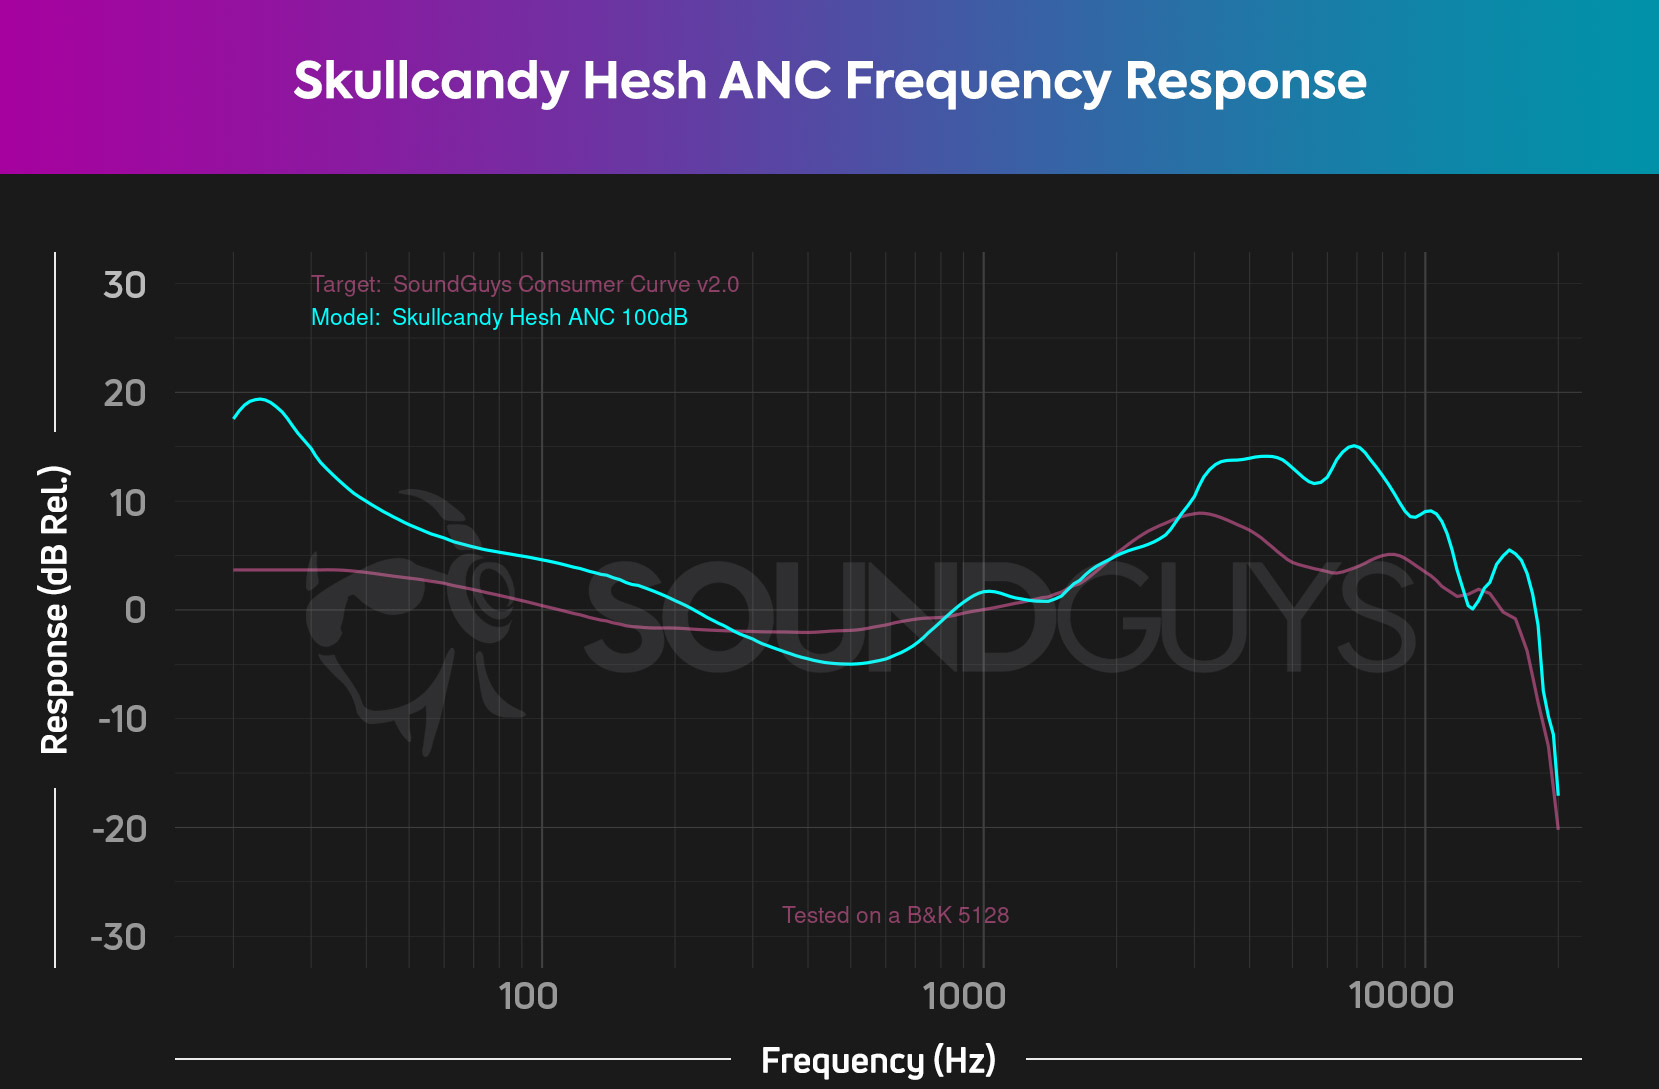 A chart shows the Skullcandy Hesh ANC frequency response which dramatically boosts sub-bass relative to the midrange and already-boosted treble.